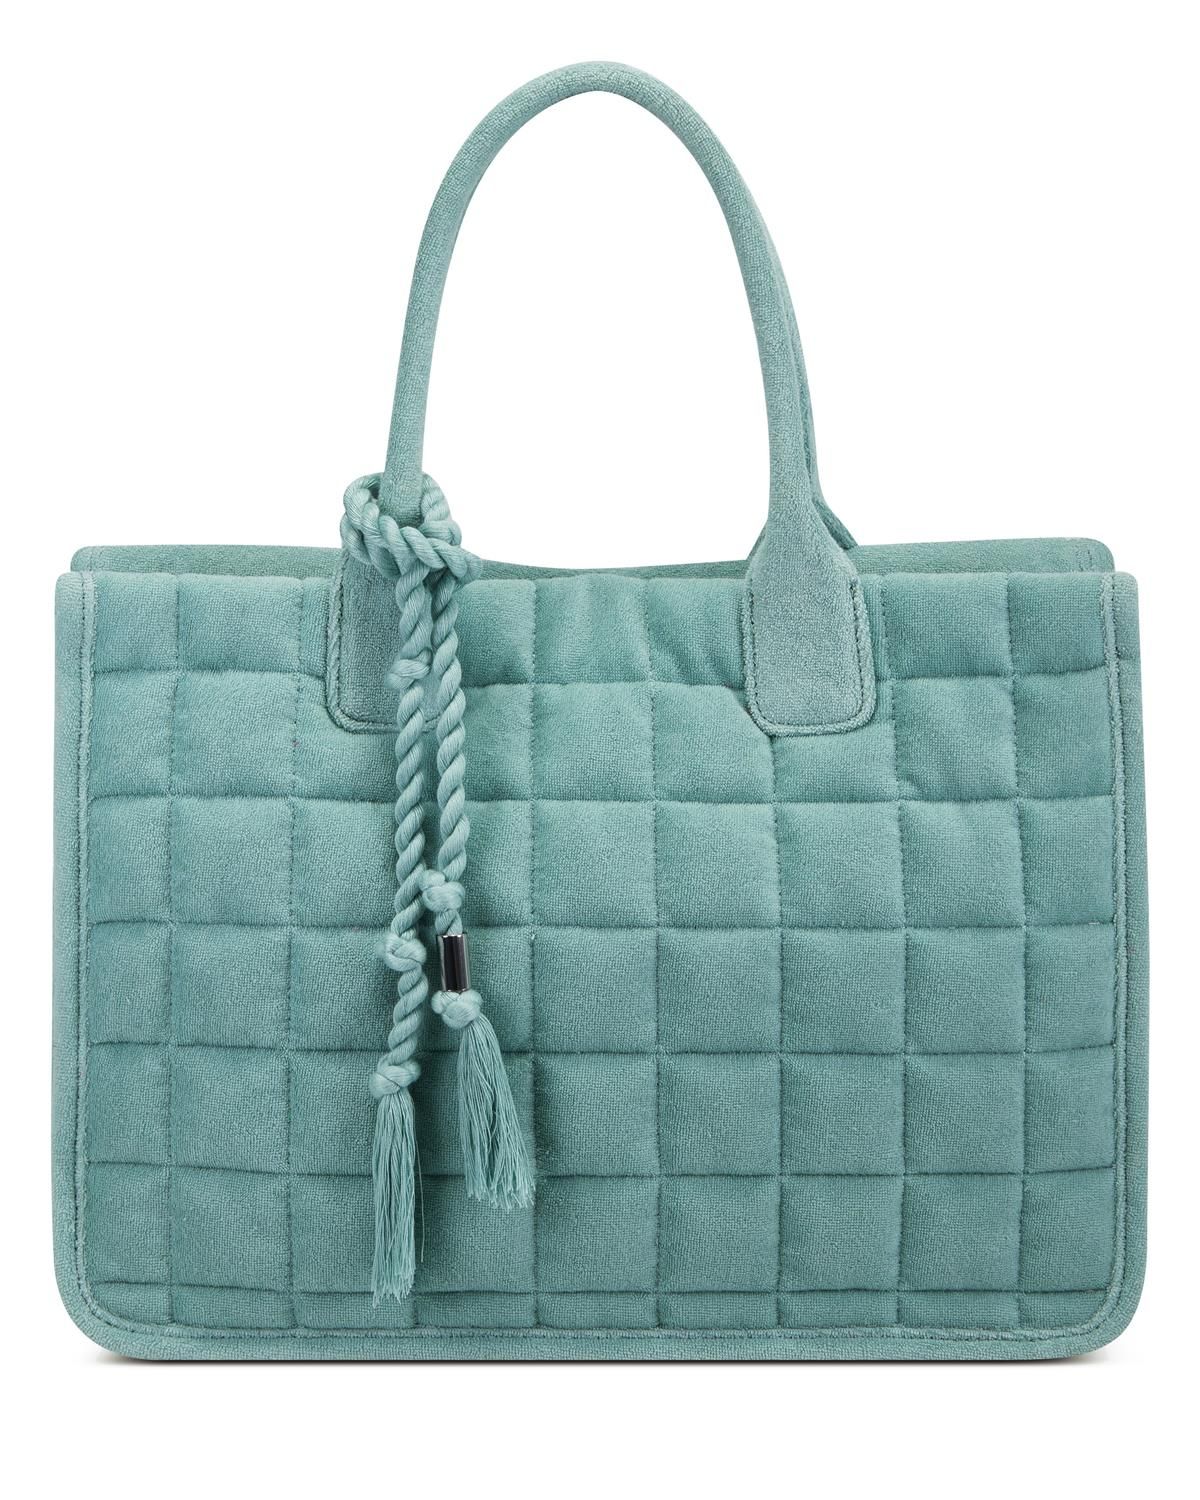 Vince Camuto Orla Tote in Pale Turquoise Lord & Taylor | Lord & Taylor